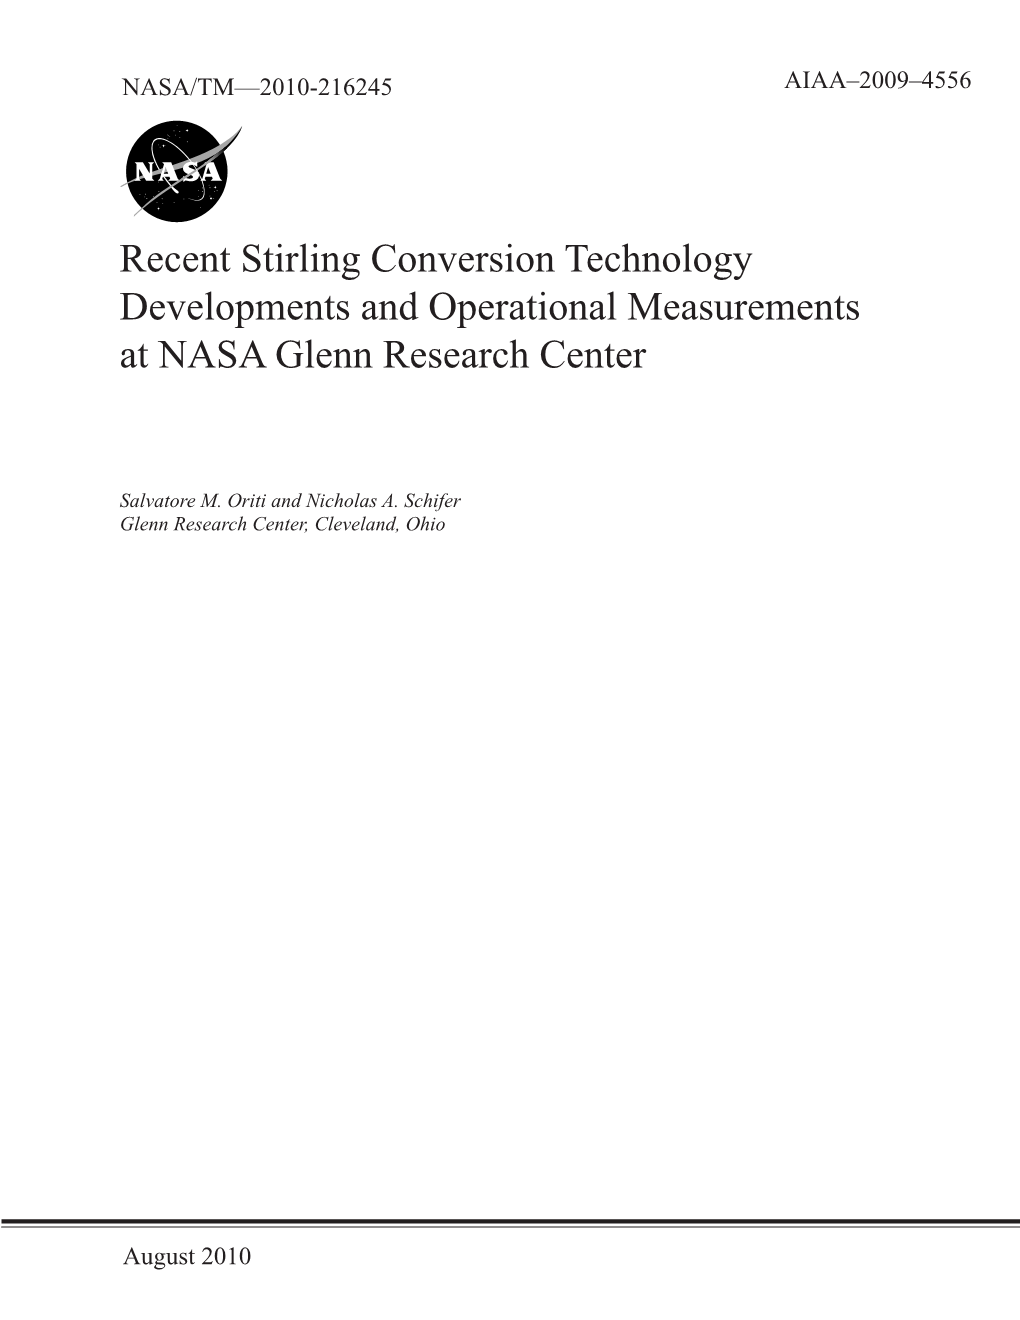 Recent Stirling Conversion Technology Developments and Operational Measurements at NASA Glenn Research Center